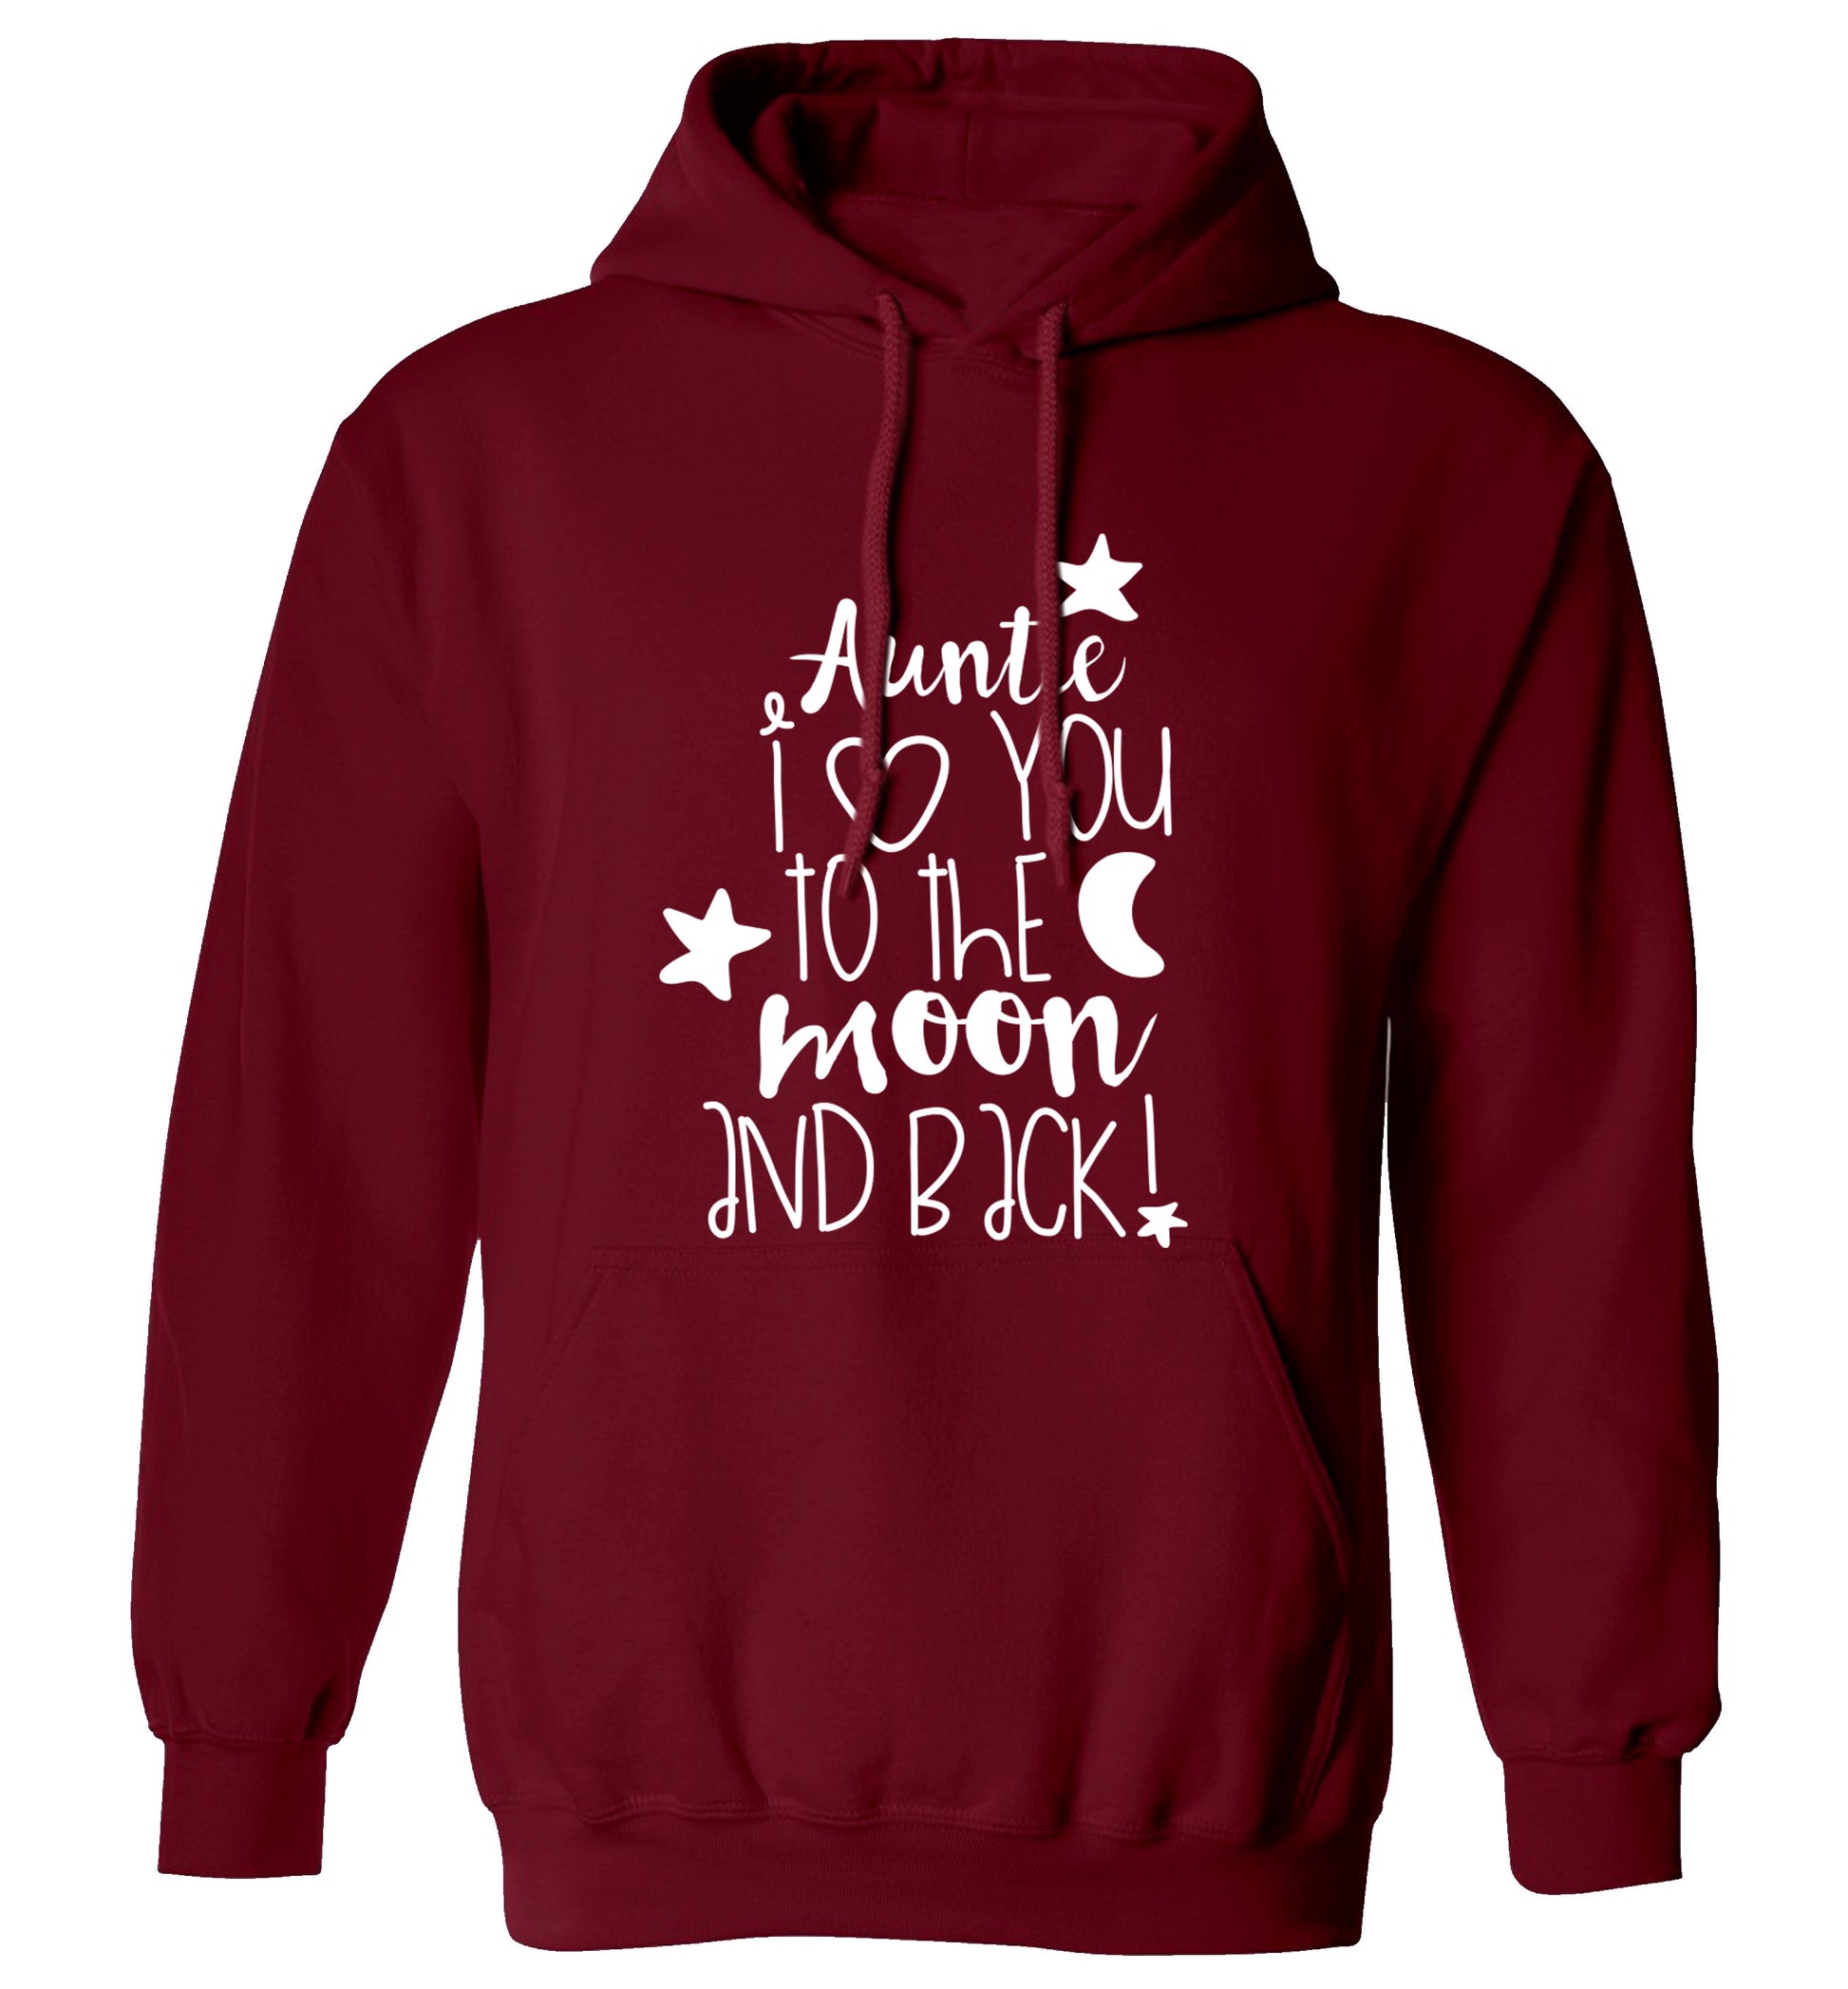 Auntie I love you to the moon and back adults unisex maroon hoodie 2XL